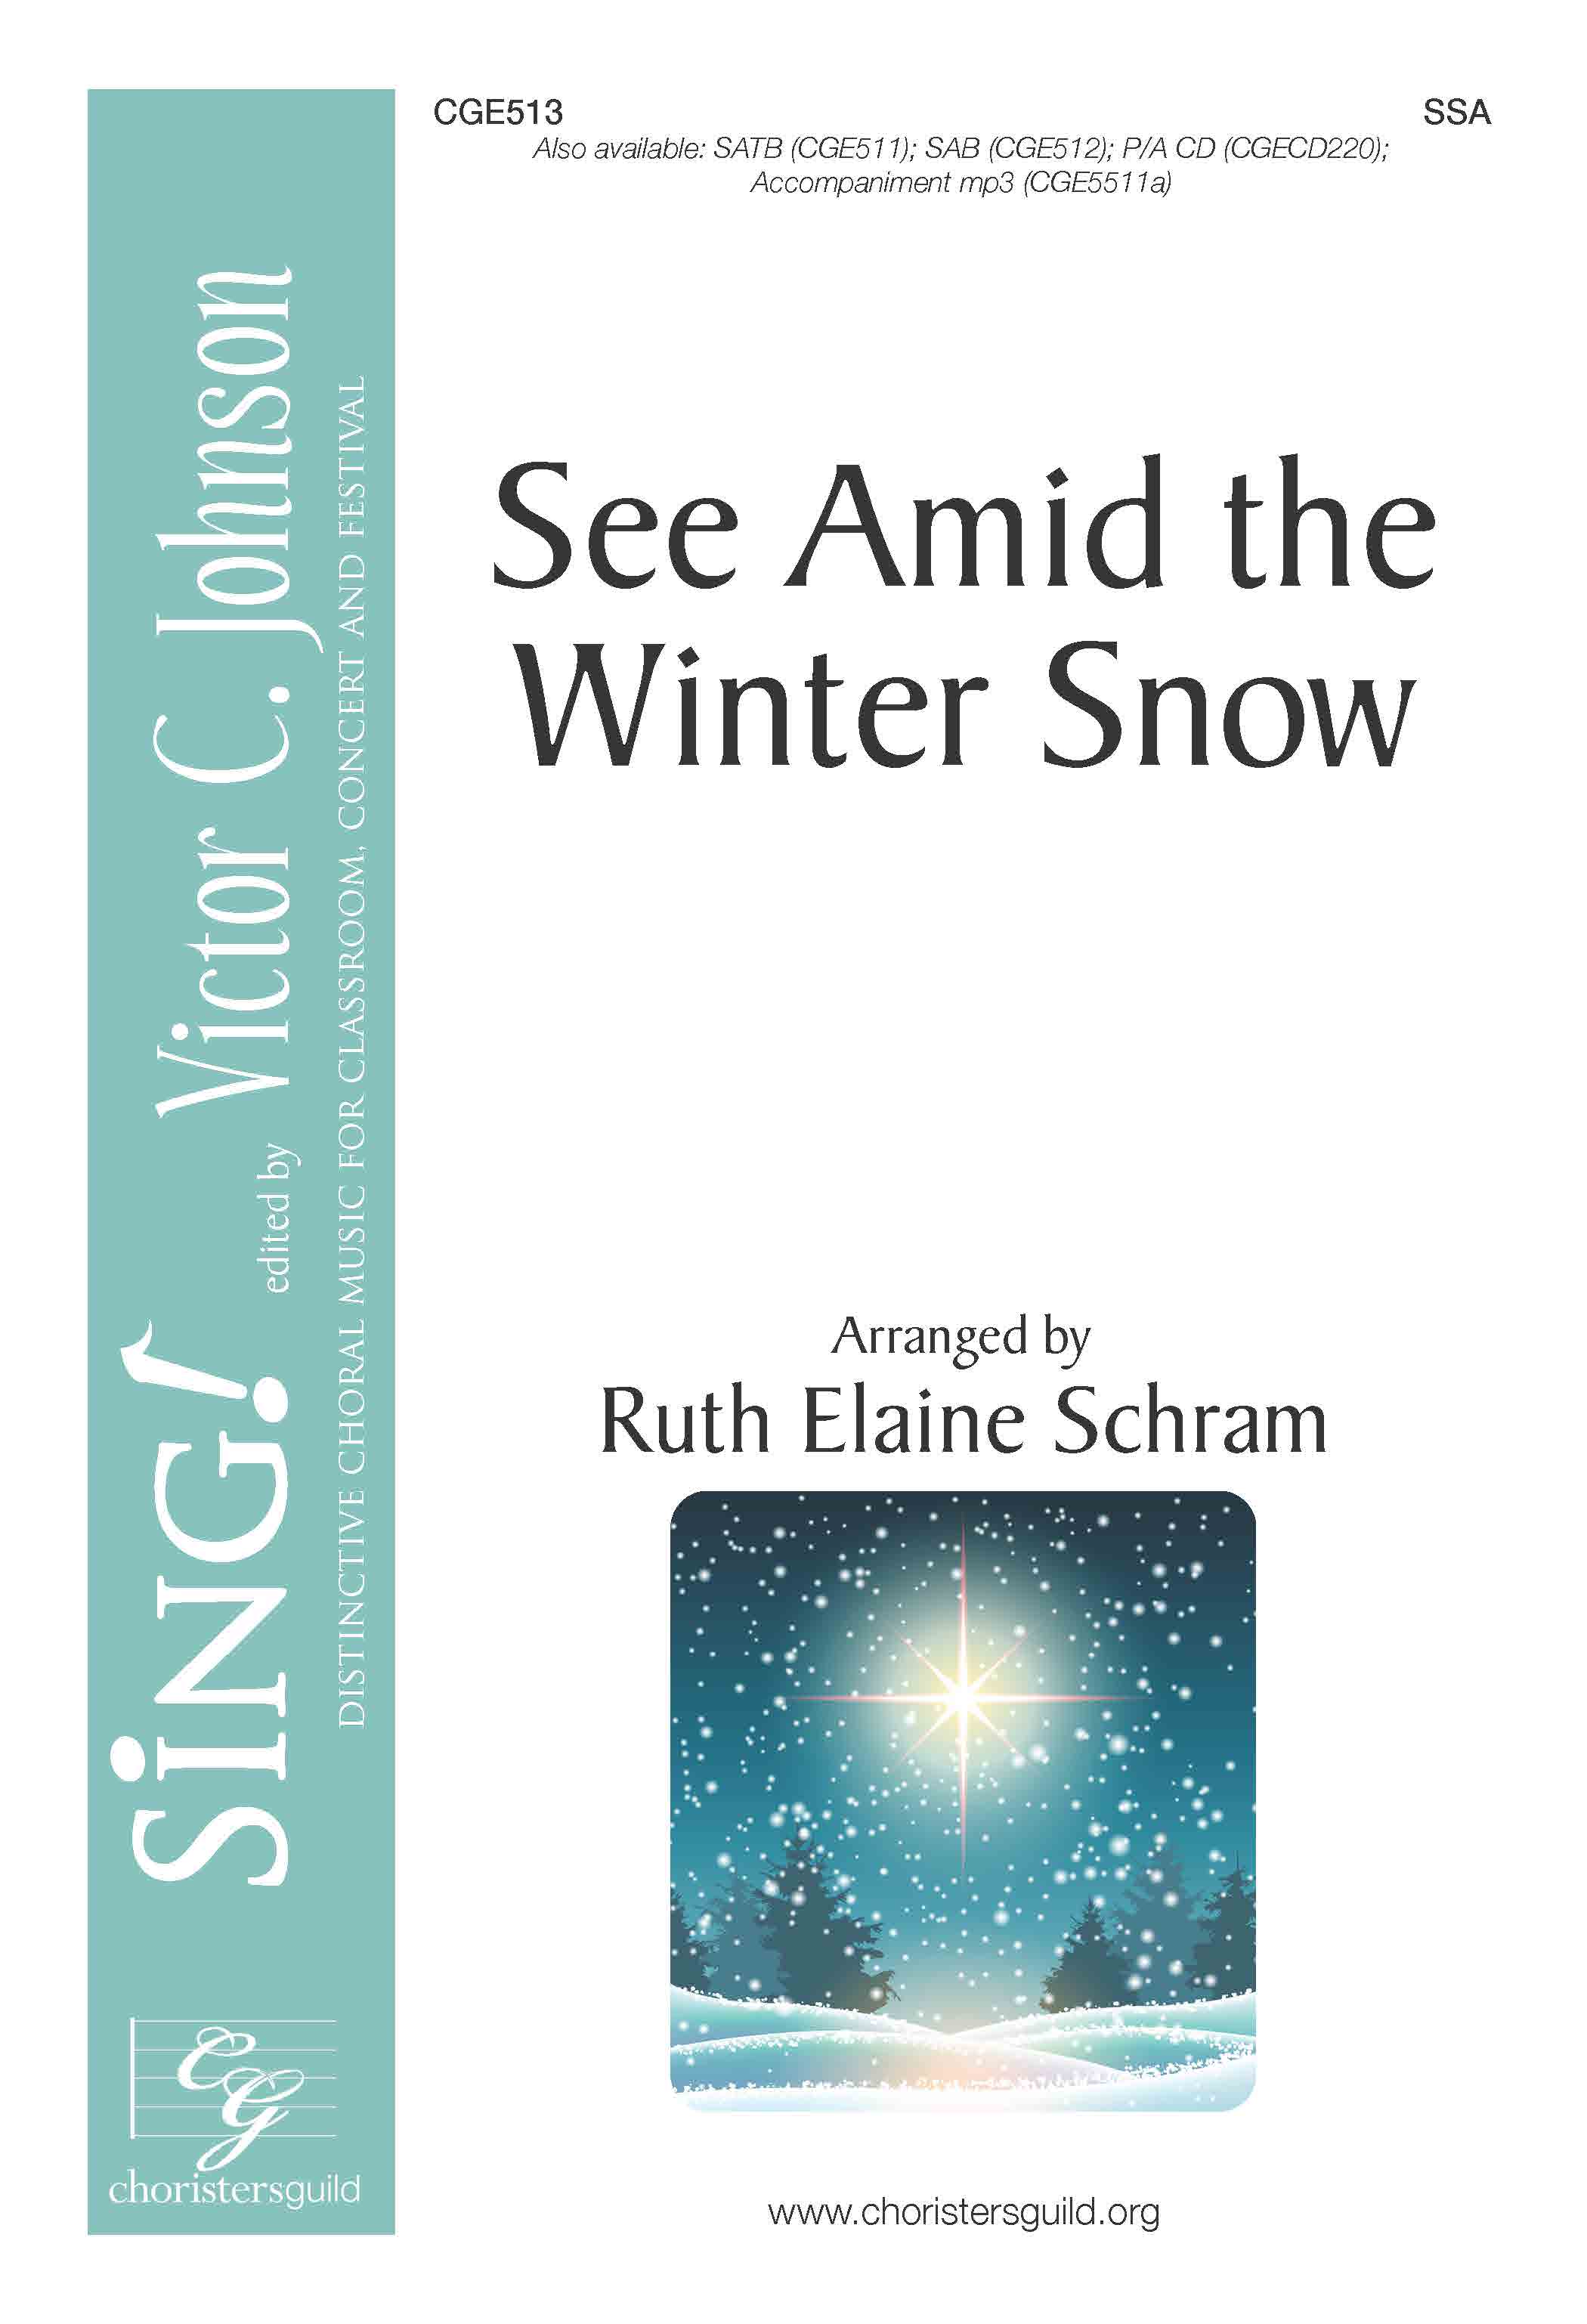 See Amid the Winter Snow - SSA